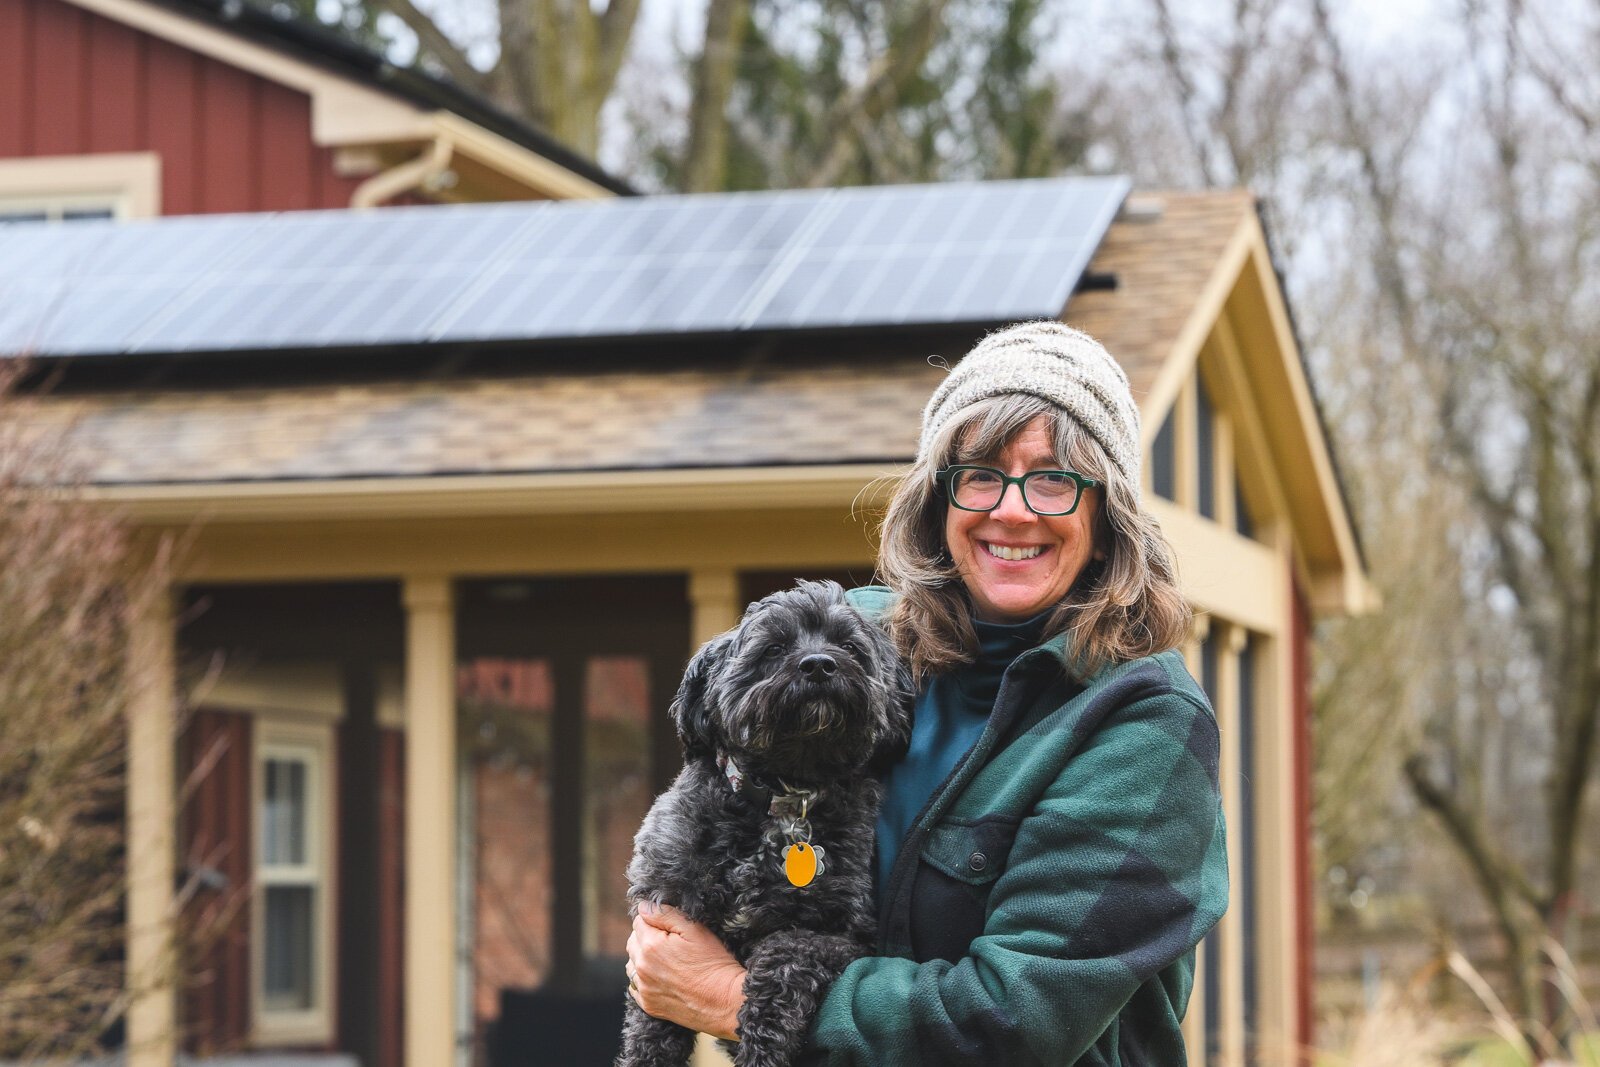 Julie Roth outside her solar panel equipped home.